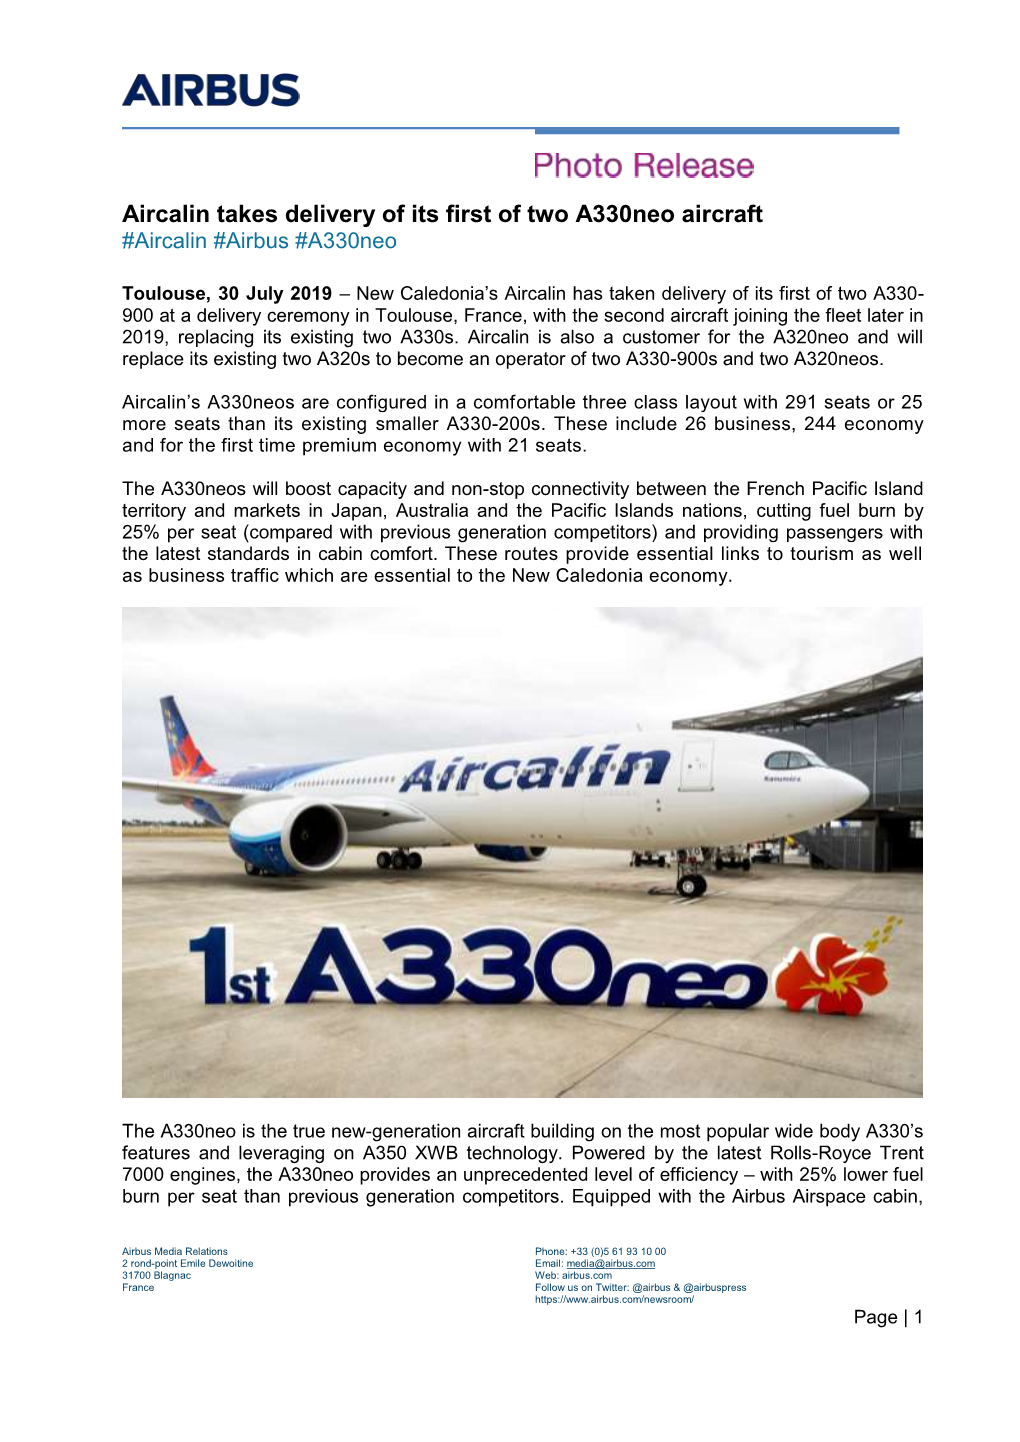 Aircalin Takes Delivery of Its First of Two A330neo Aircraft #Aircalin #Airbus #A330neo